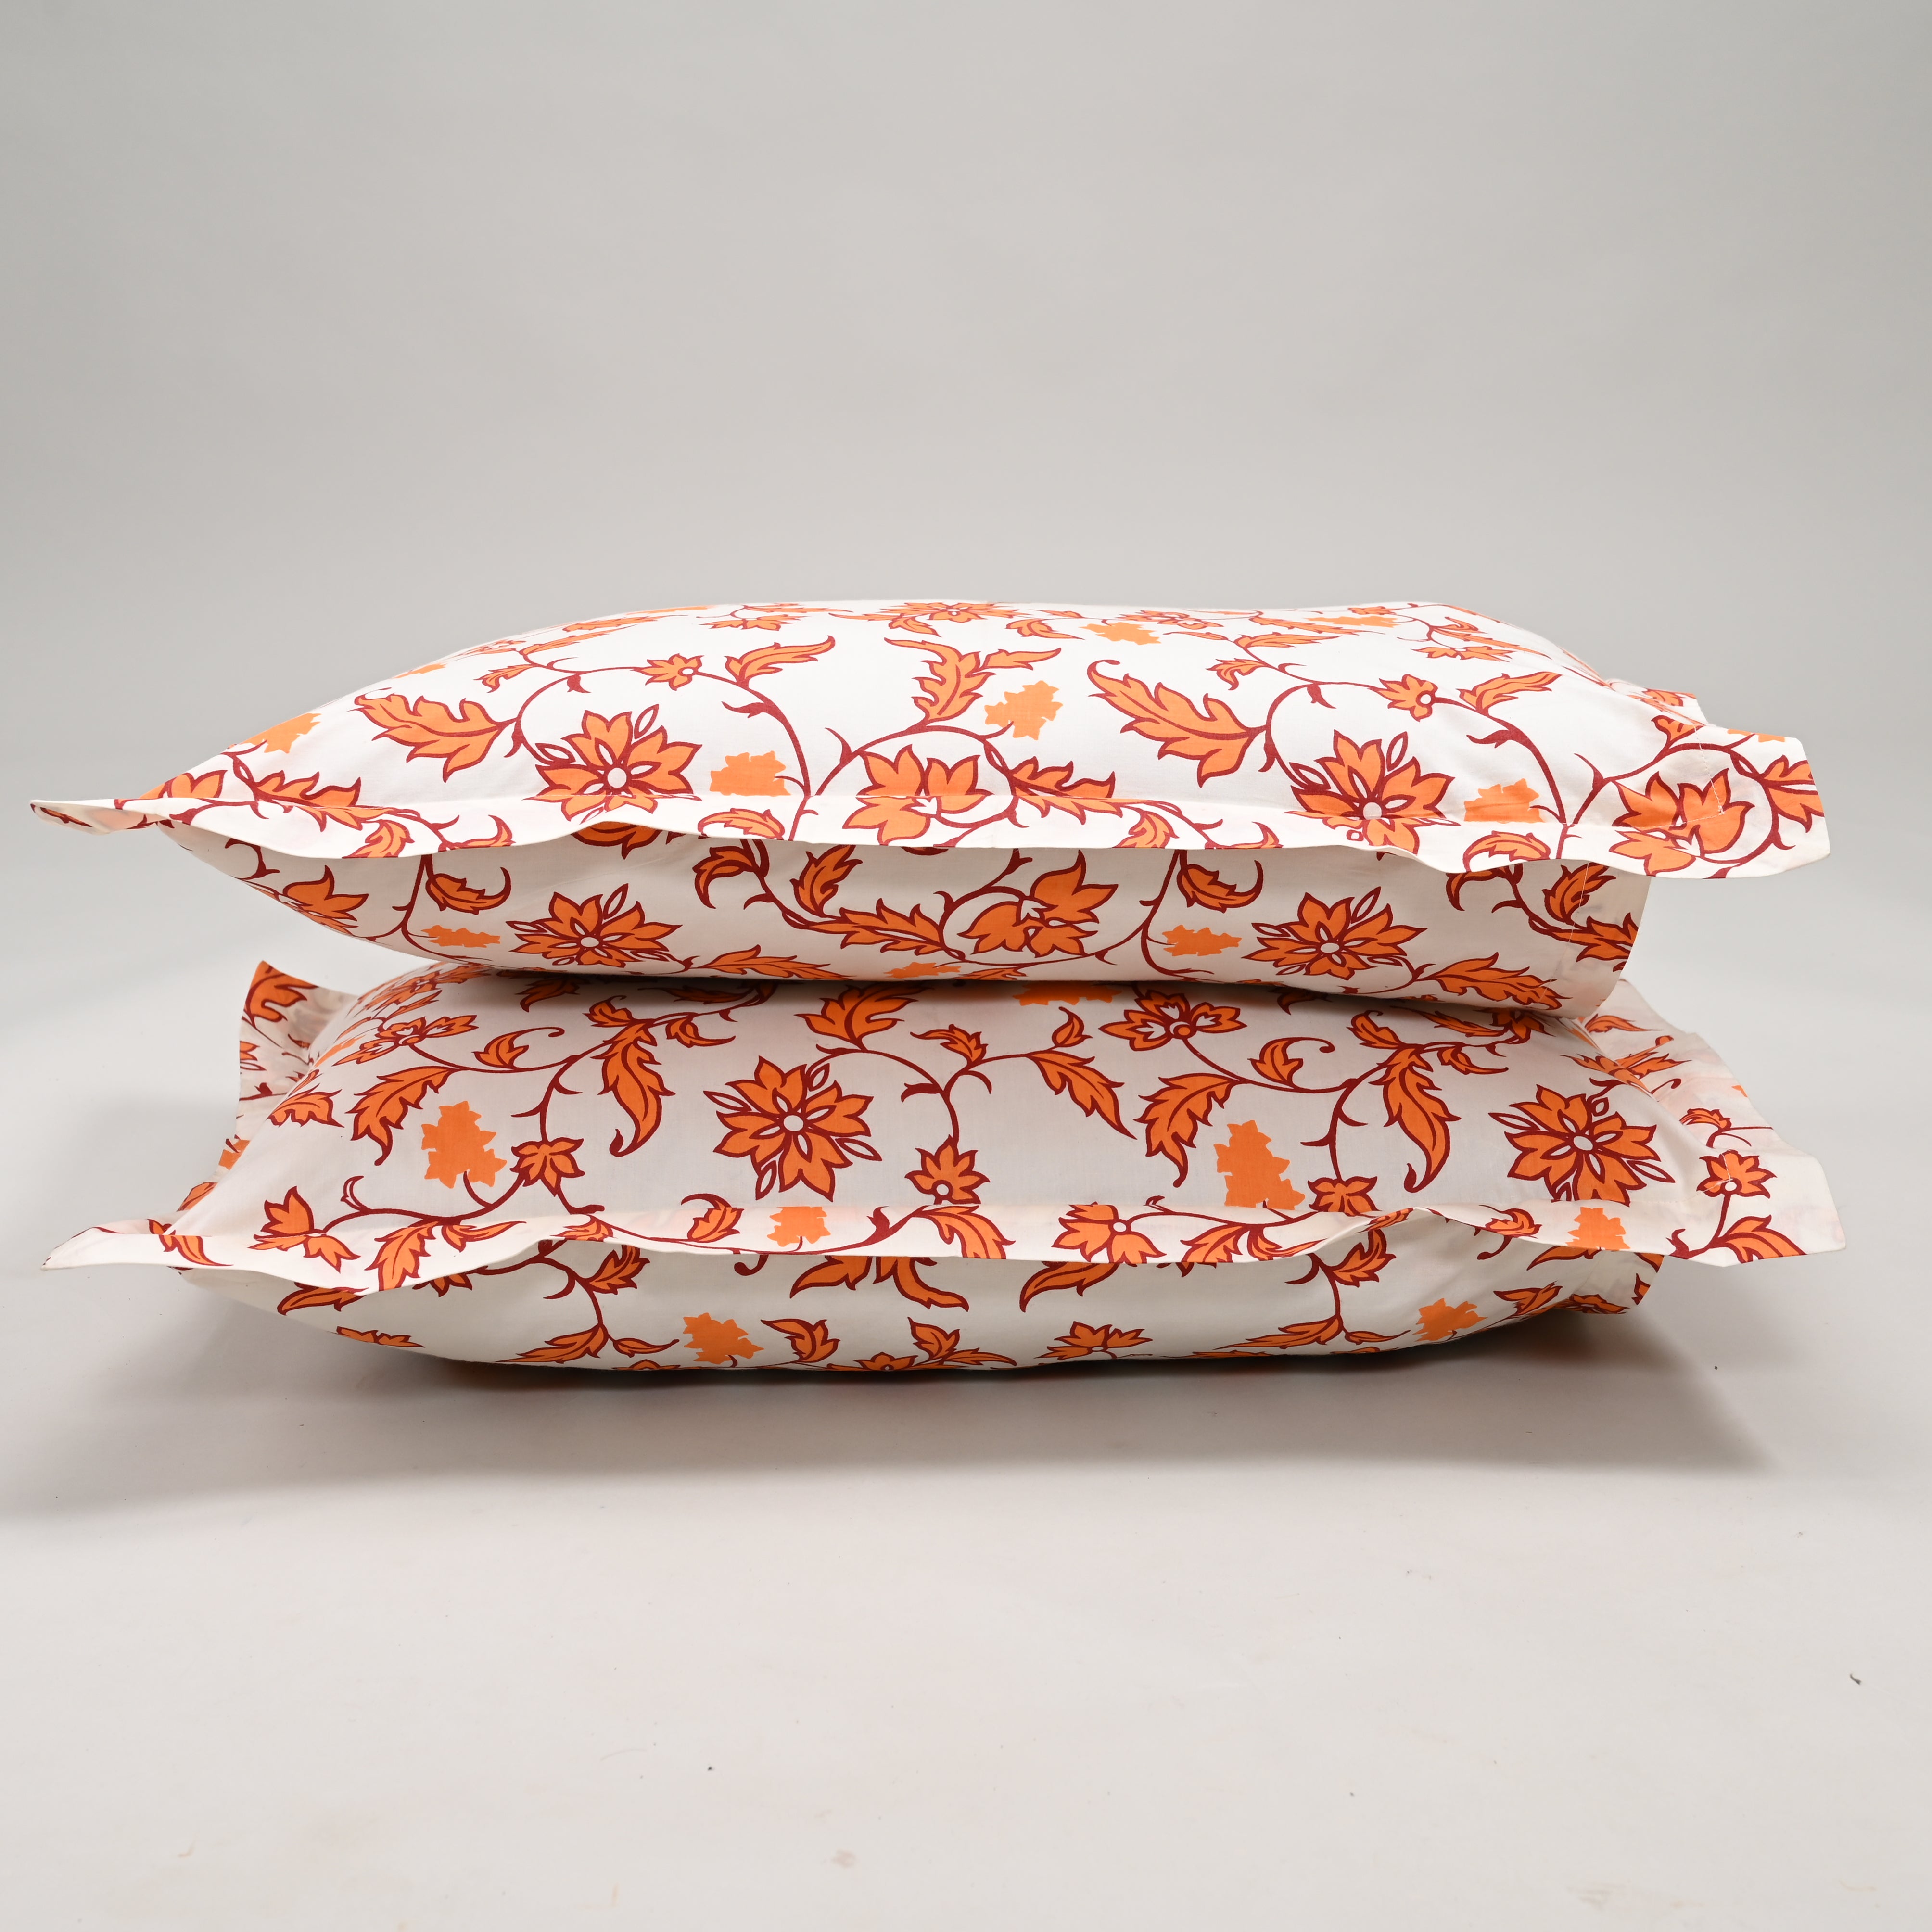 Leaves Pillow Set of 2 Covers